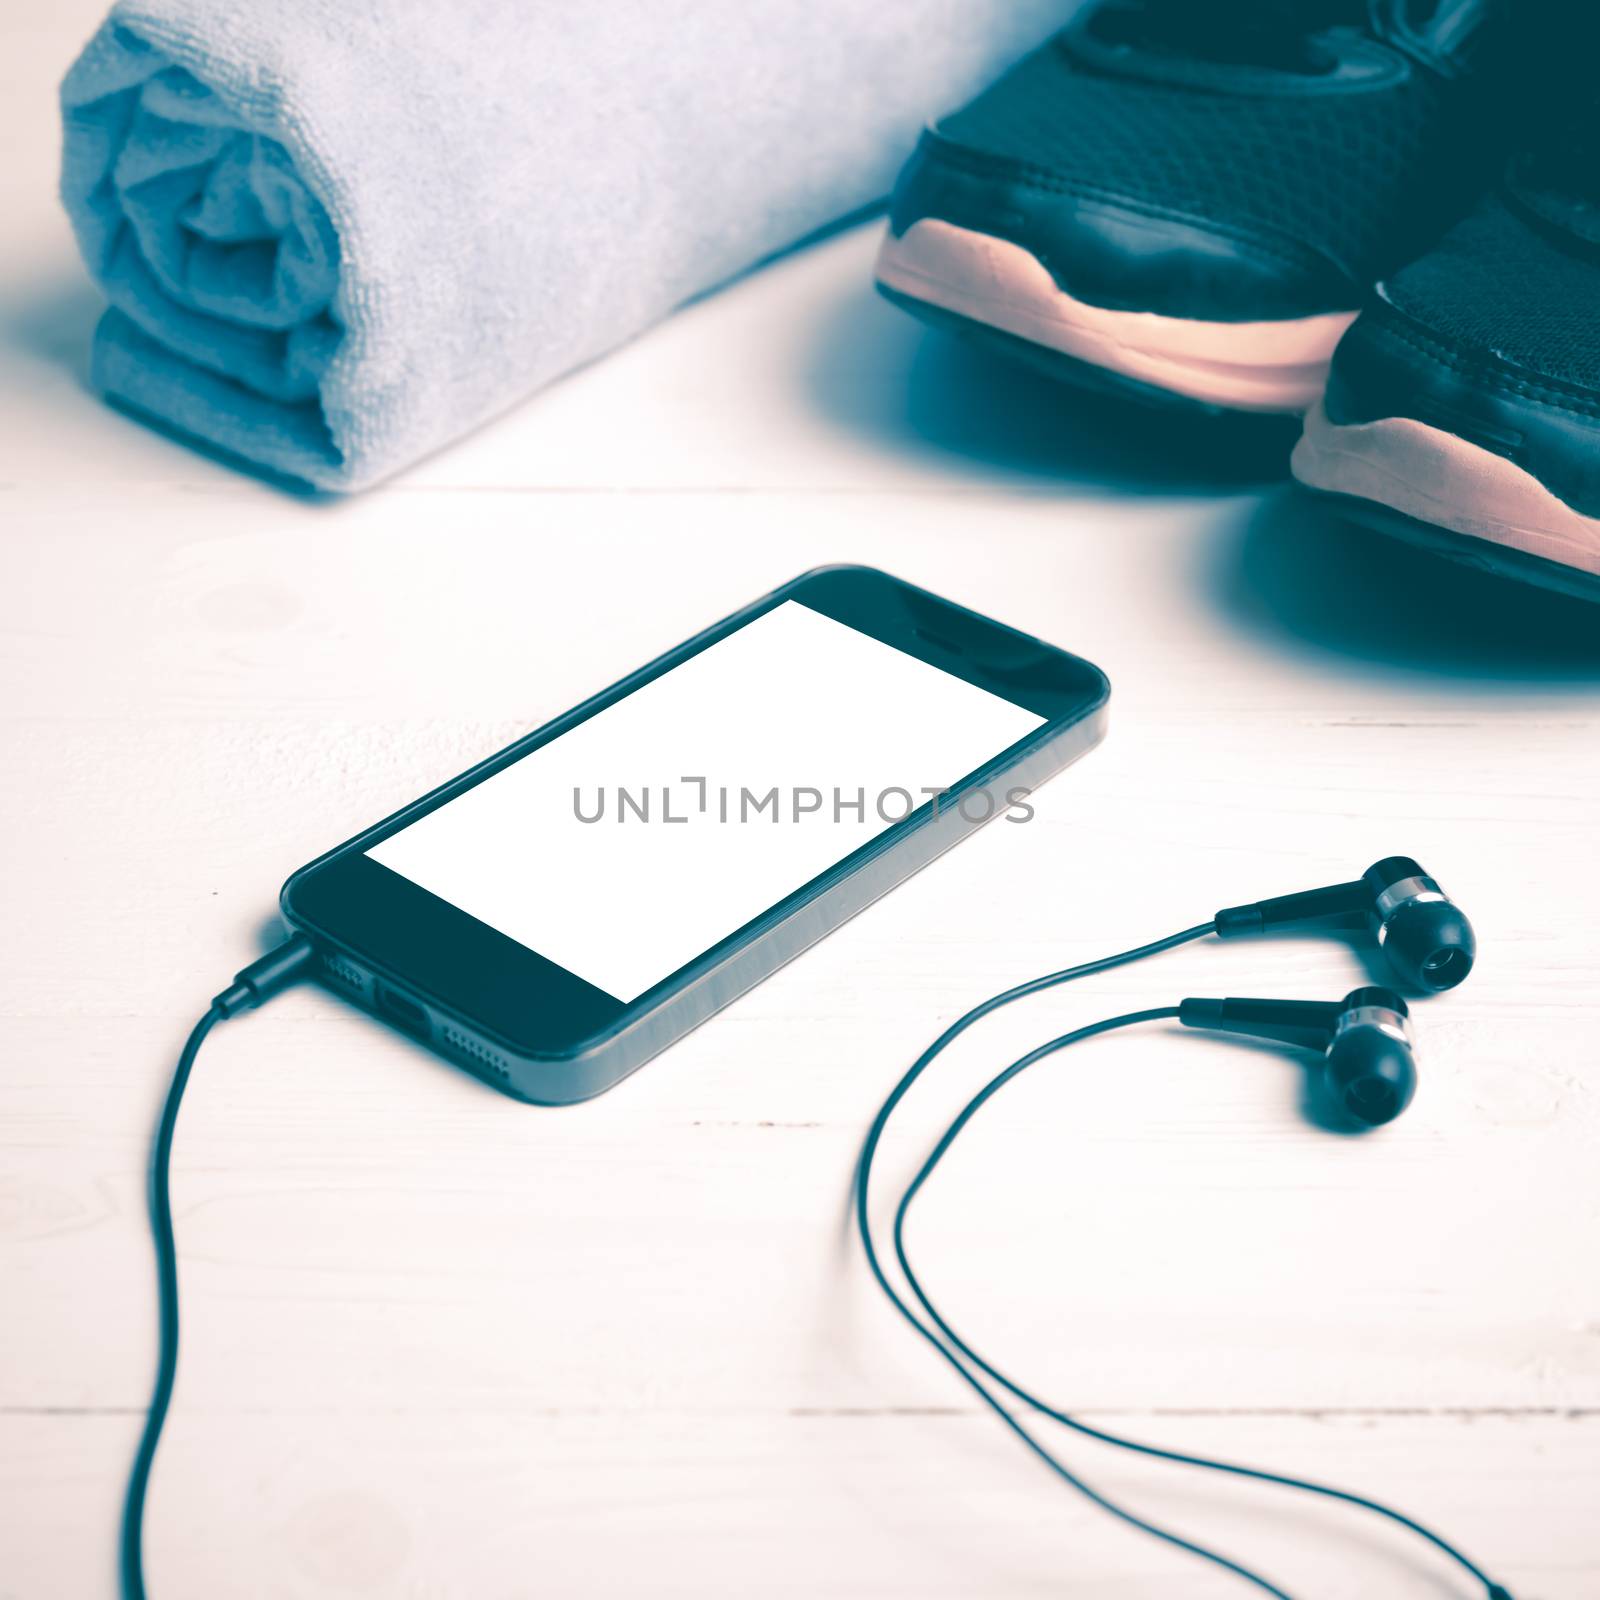 fitness equipment:running shoes,blue towel and smart phone on white wood table vintage style